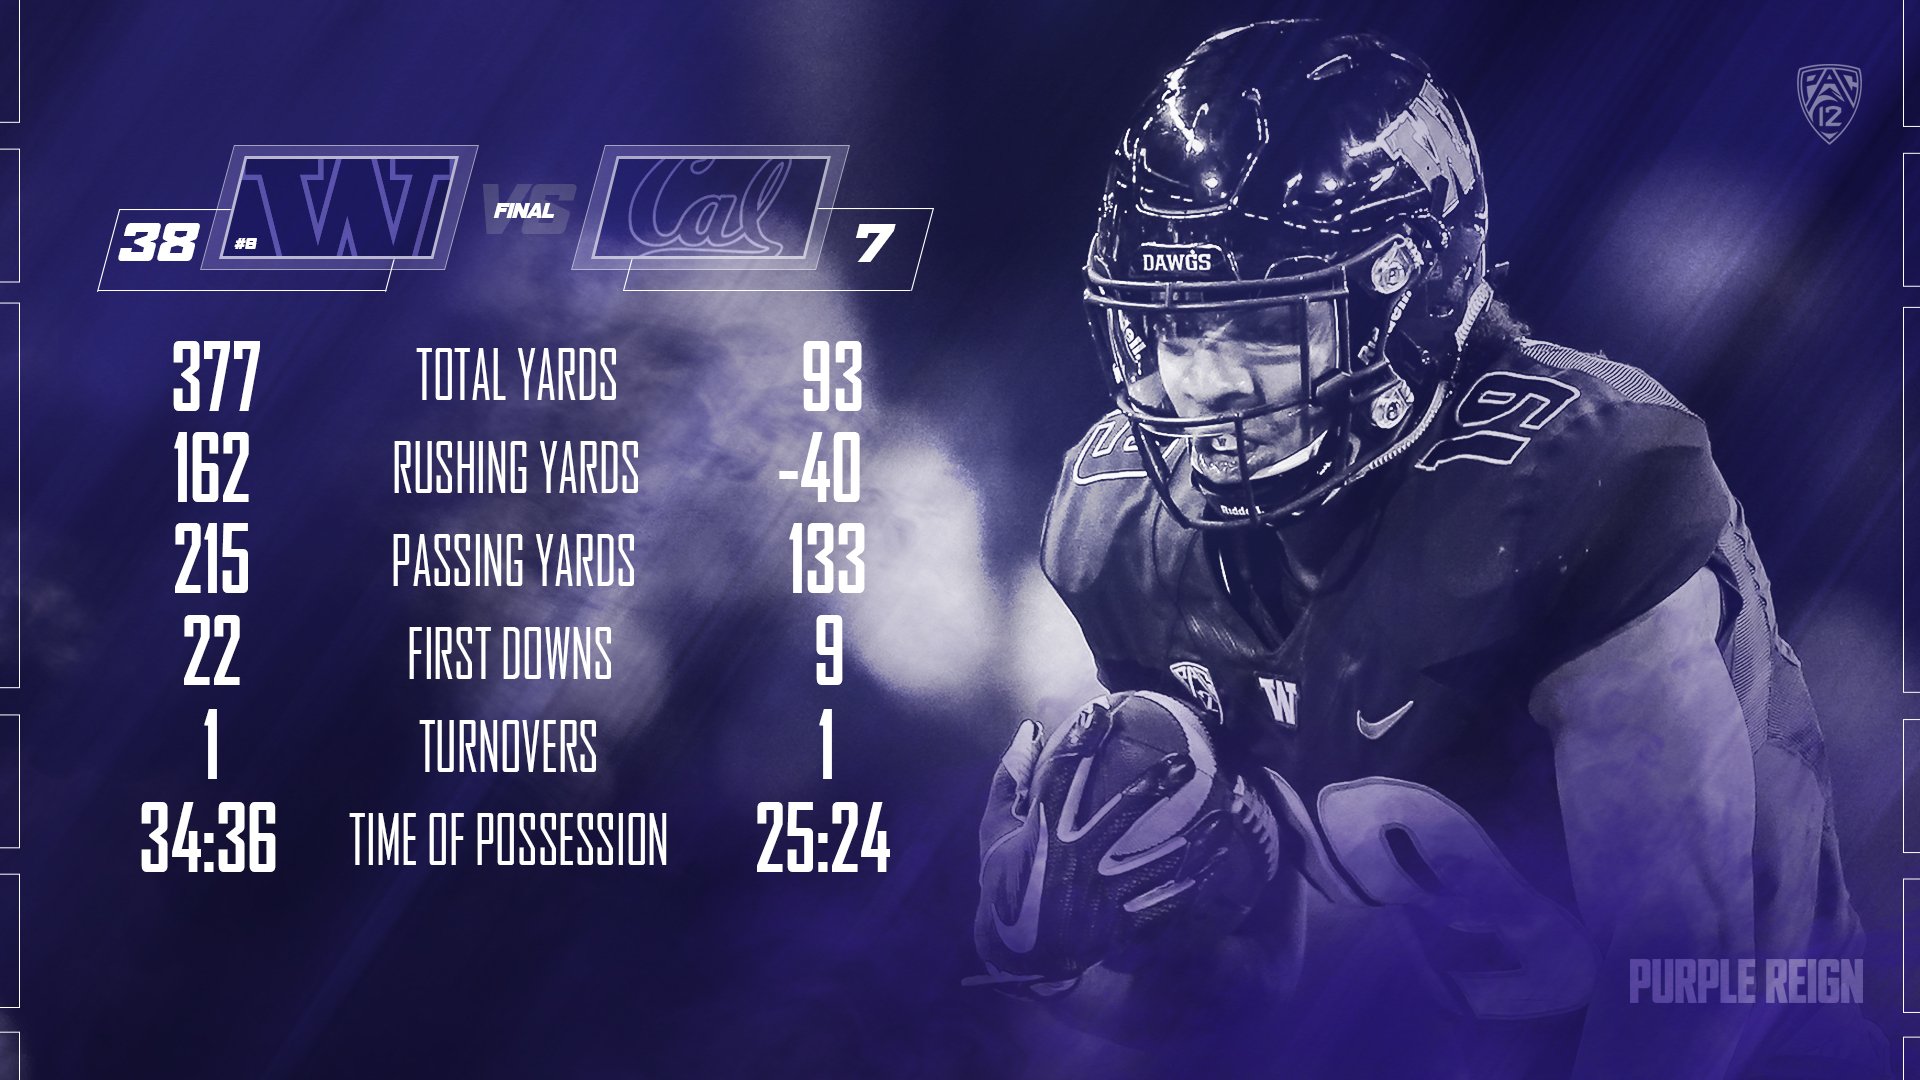 Stats from the victory of University of Whasington against Cal